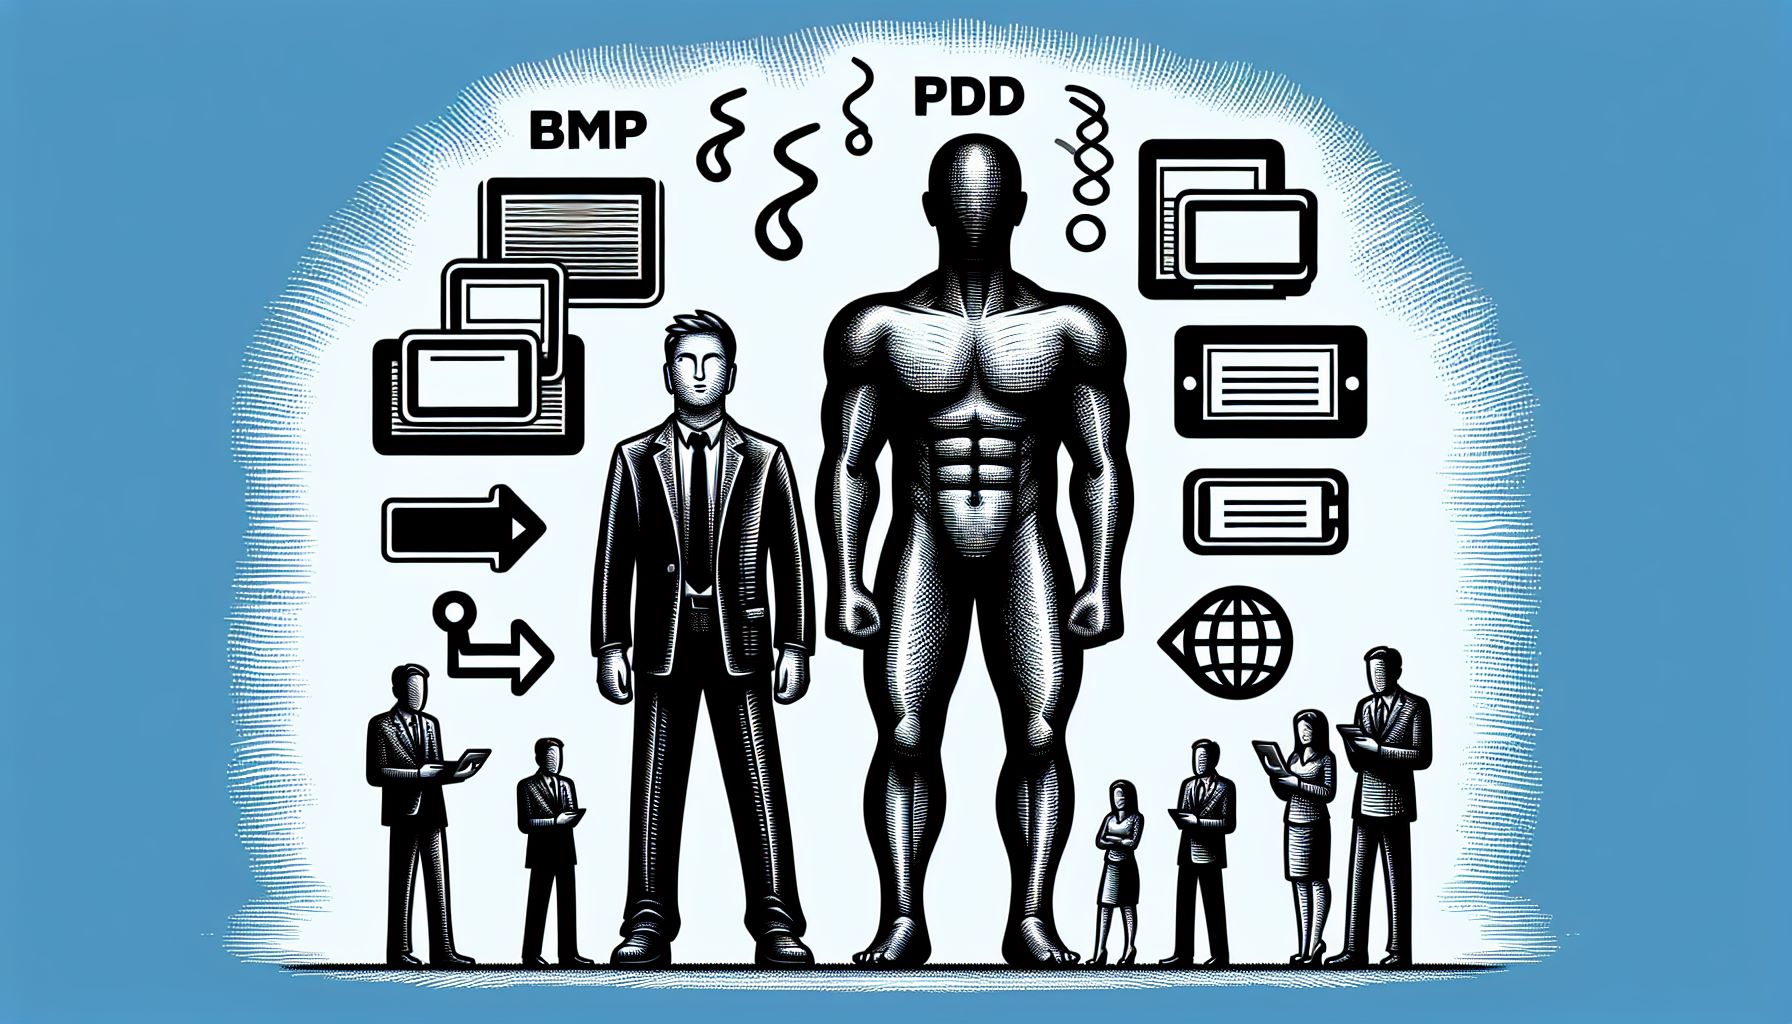 Comparison between BMP and PDF file formats